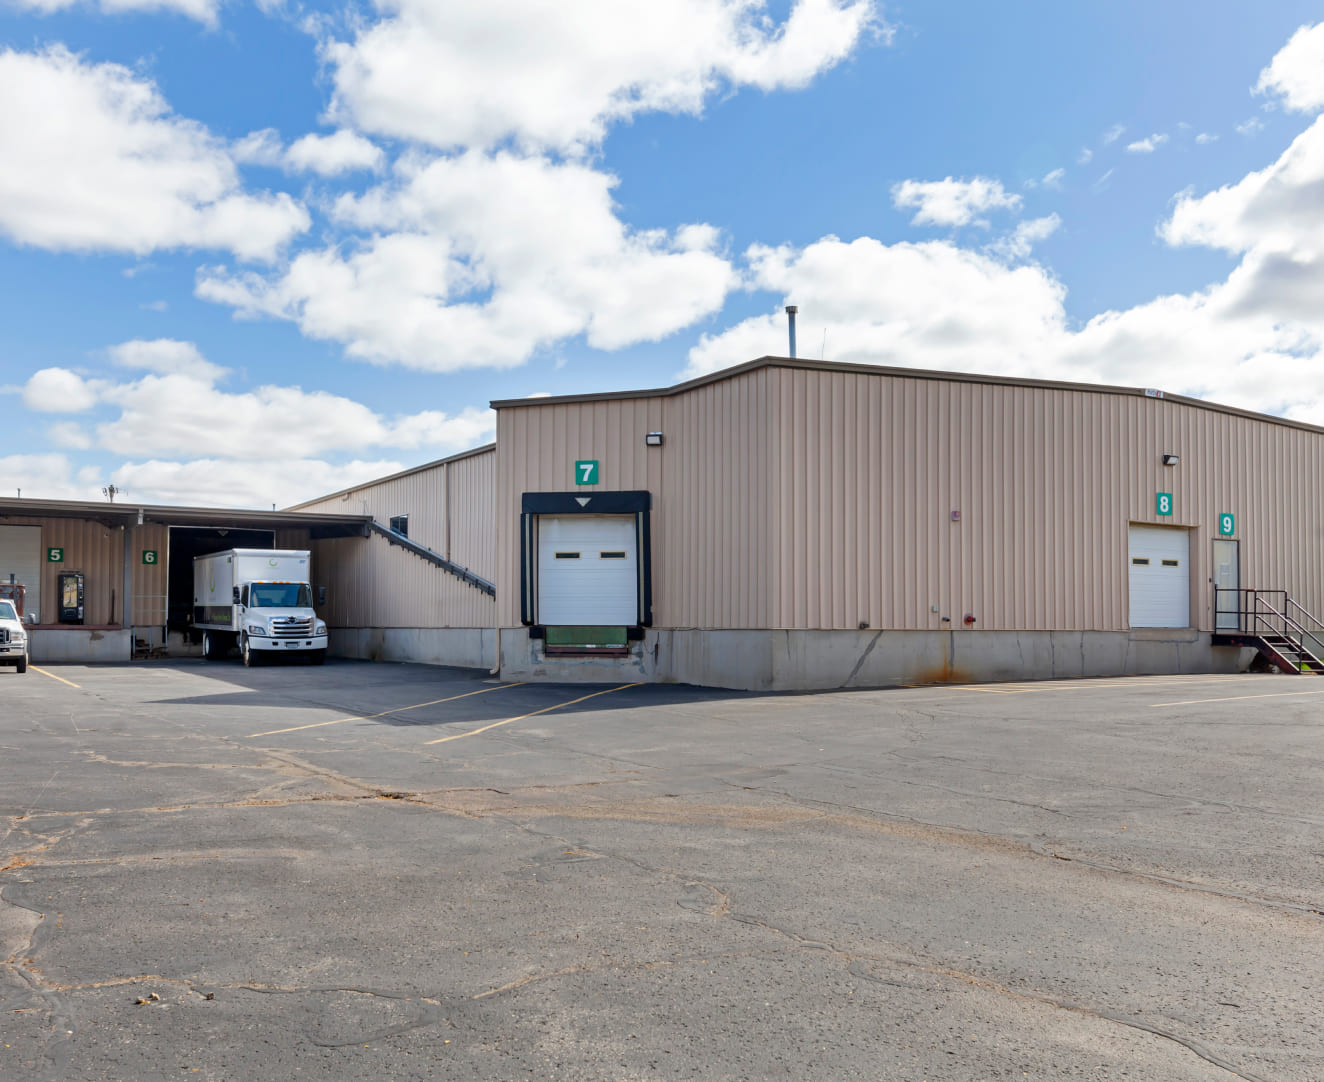 Exterior loading docks 7, 8, and 9 at 2305 Daniels Street and 2250-2258 Mustang Way in Madison, WI.